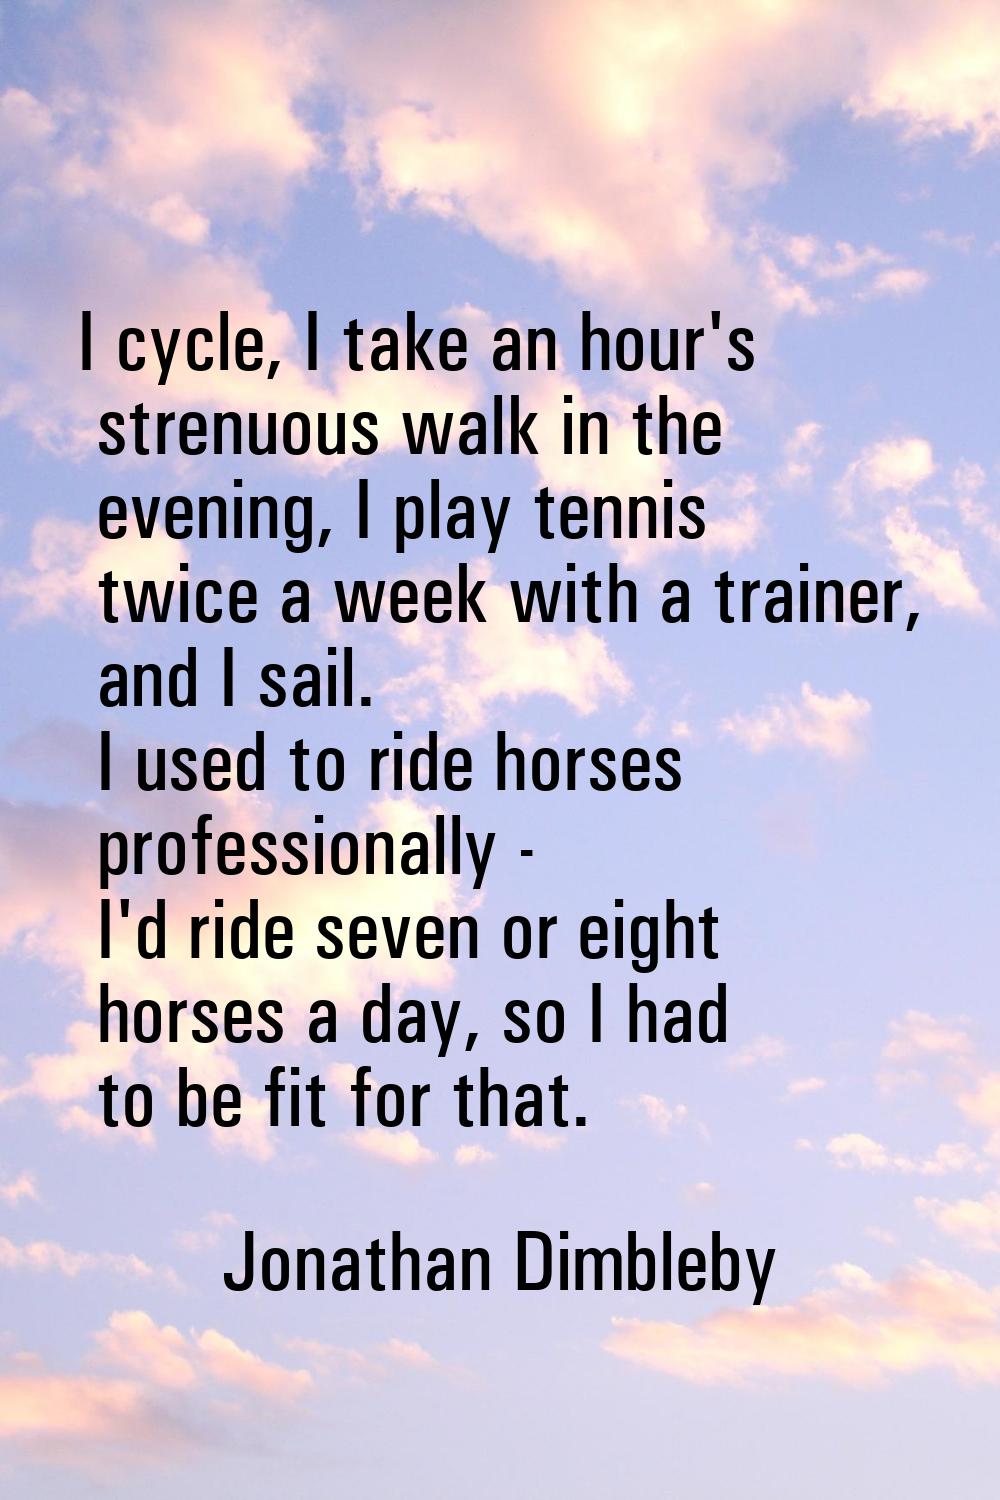 I cycle, I take an hour's strenuous walk in the evening, I play tennis twice a week with a trainer,